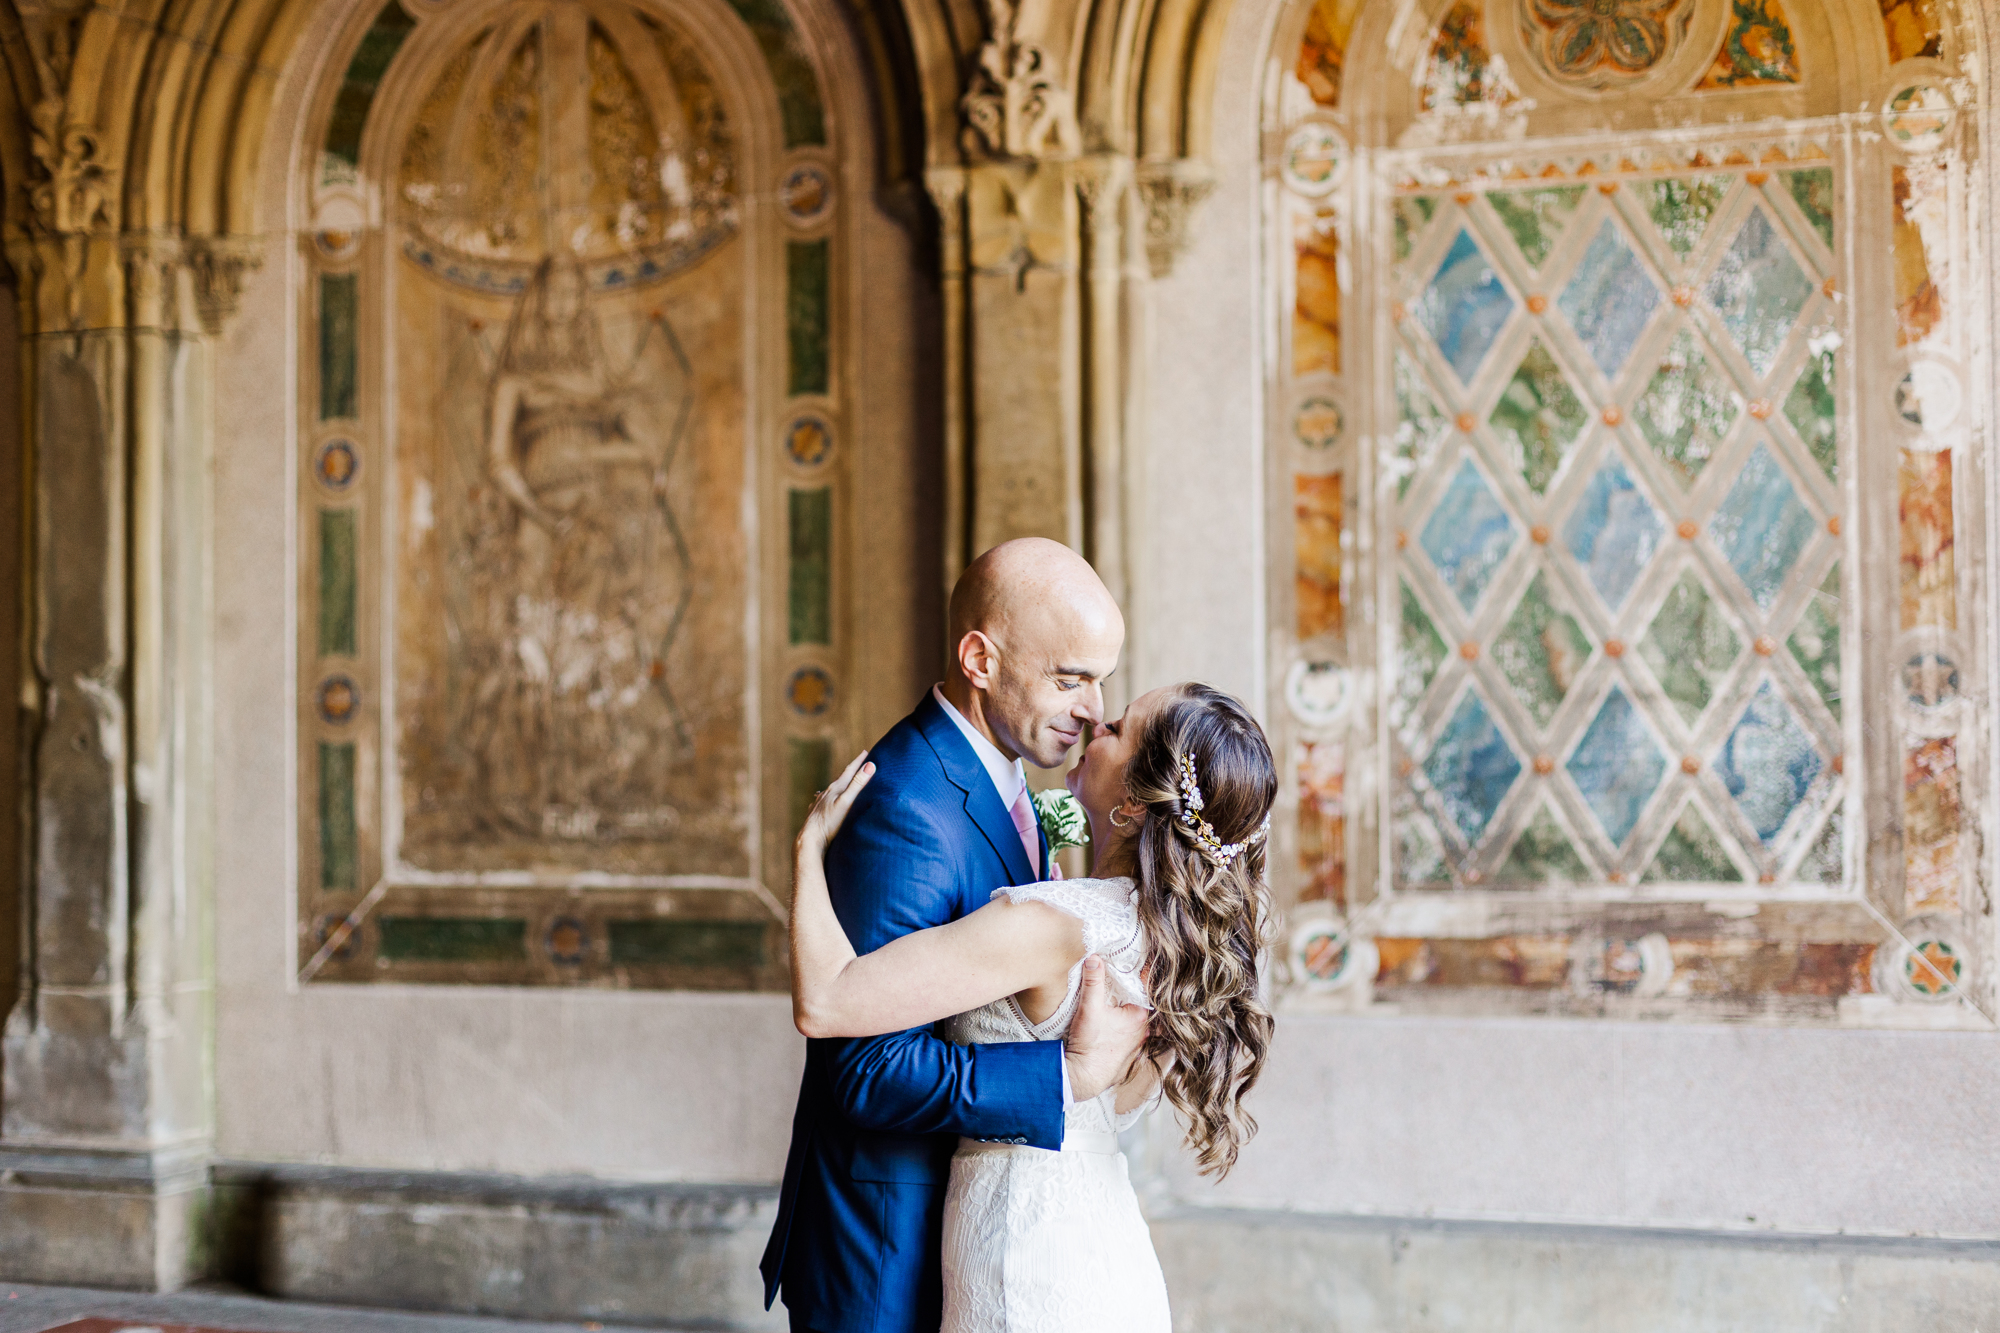 Cheerful Ladies Pavilion Elopement in NYC